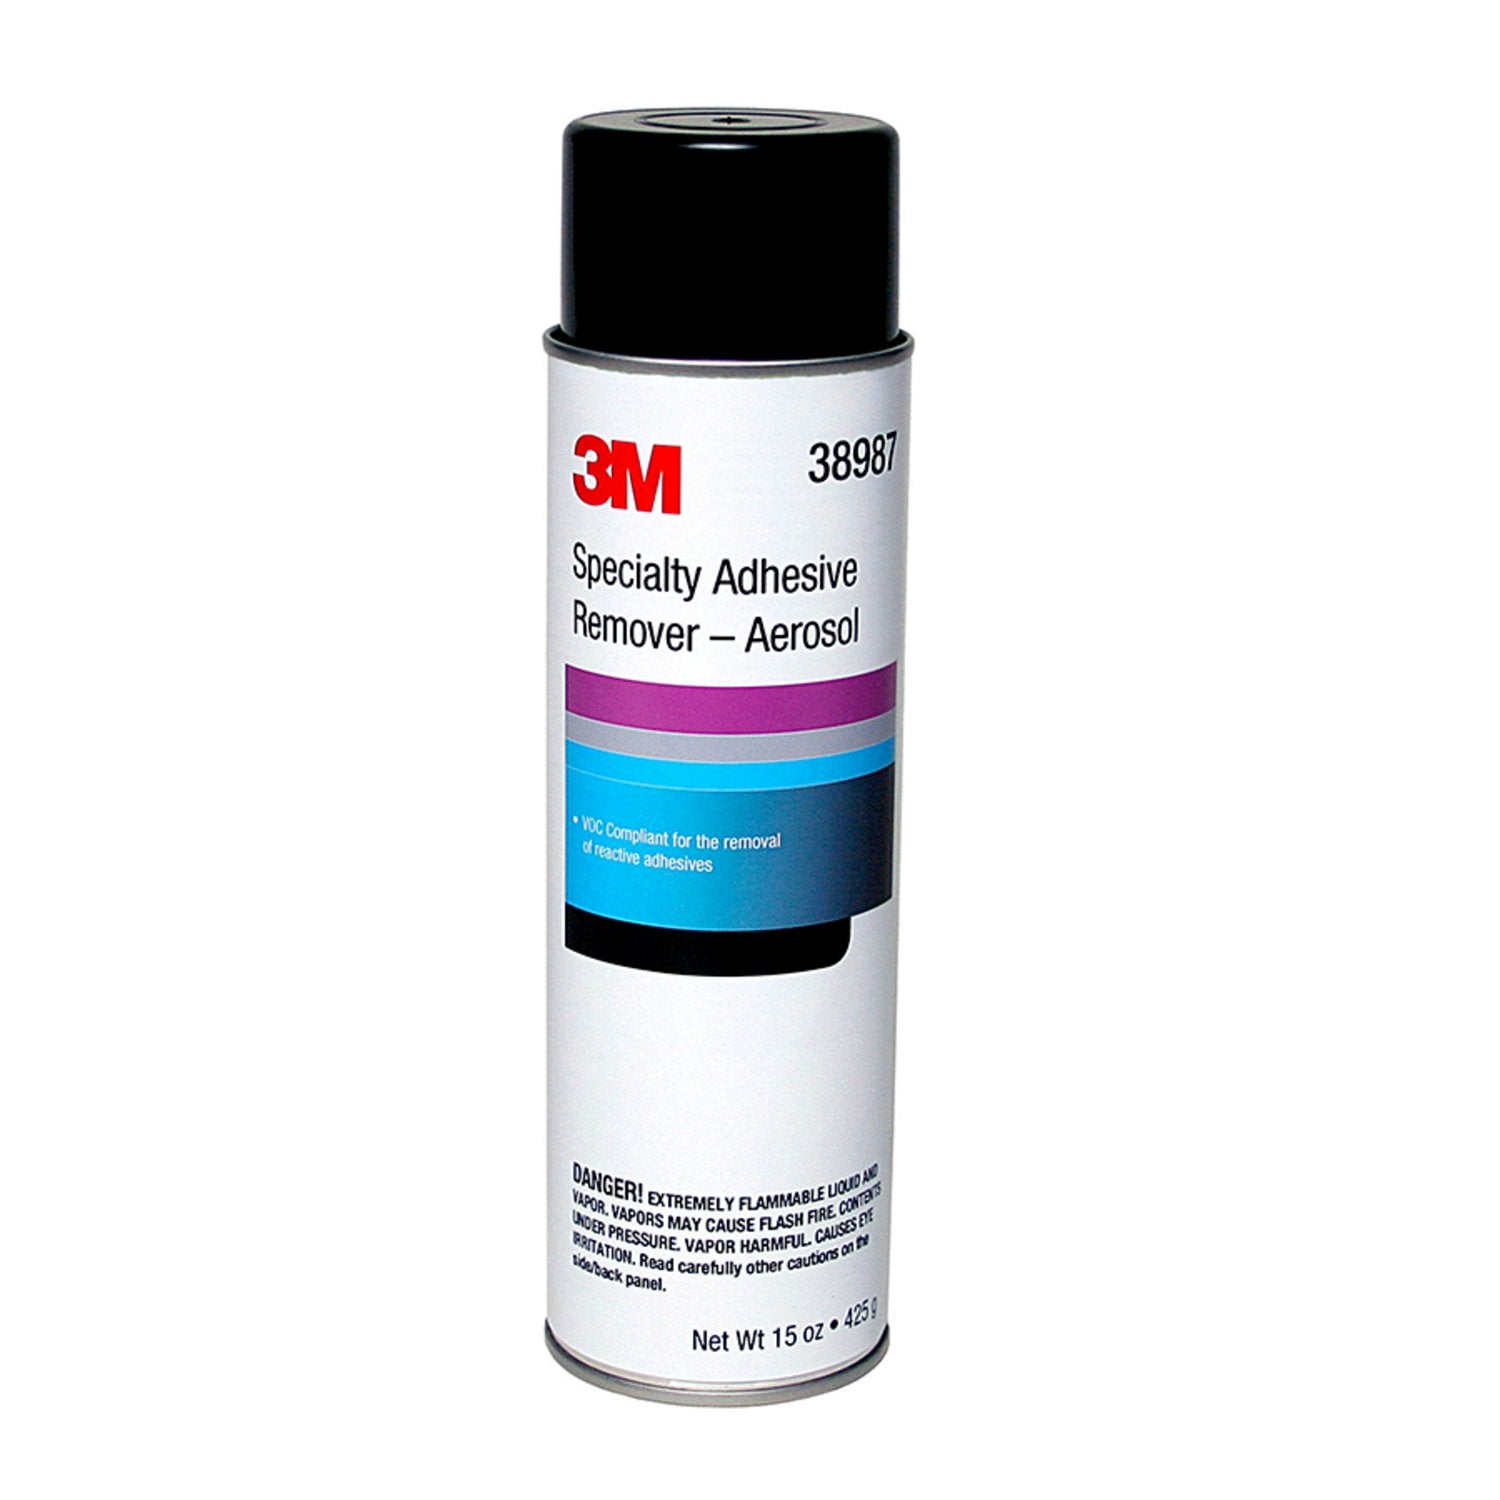 3M SPECIALTY ADHESIVE R